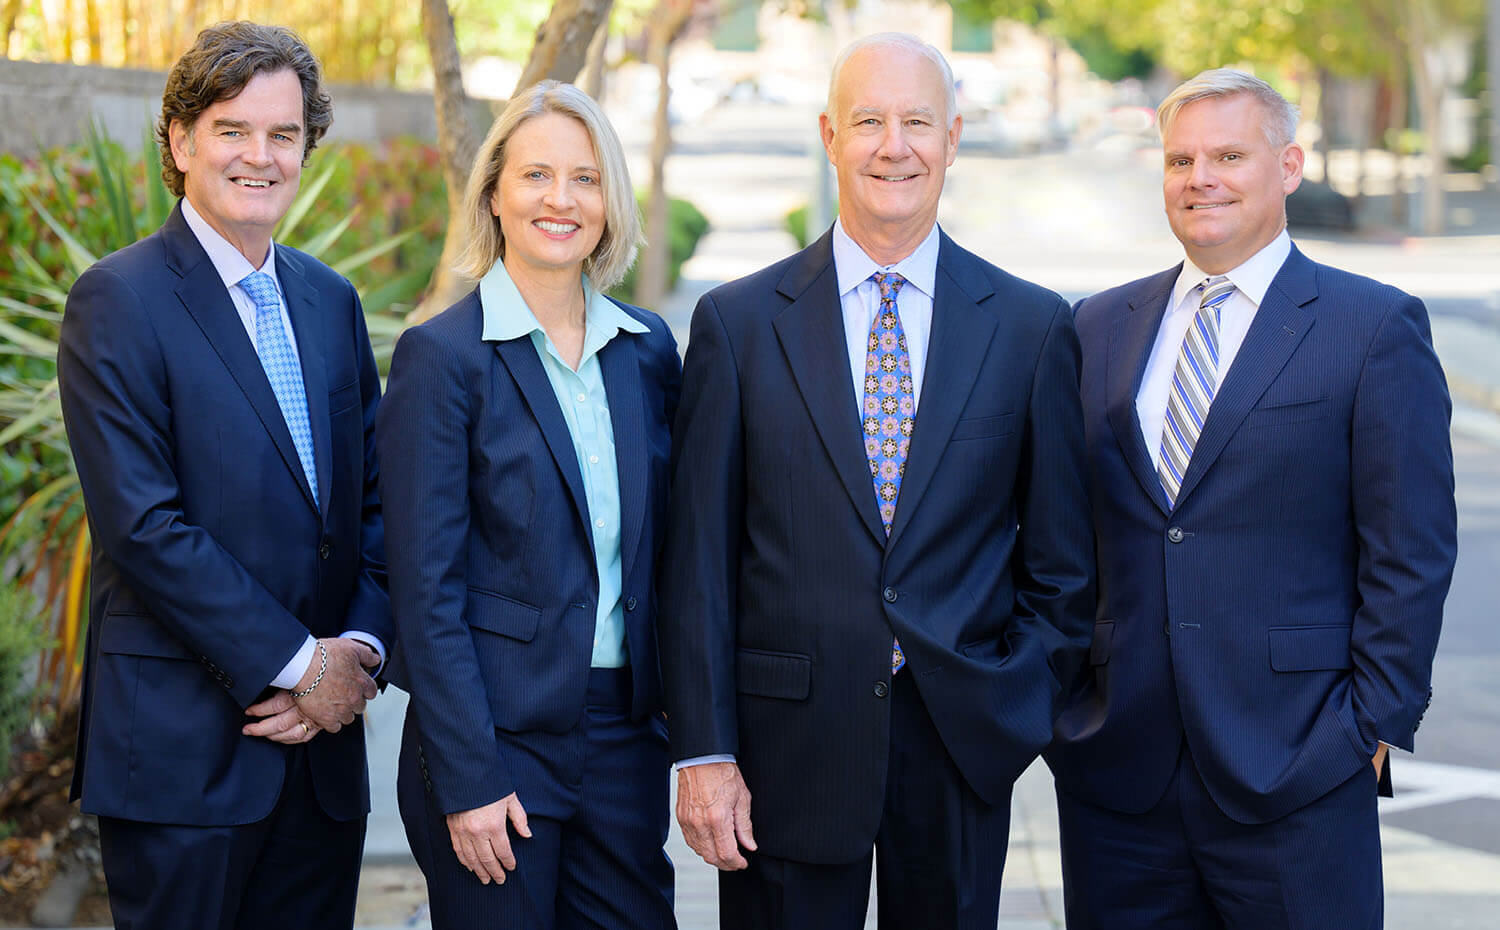 PMR group photo of attorneys